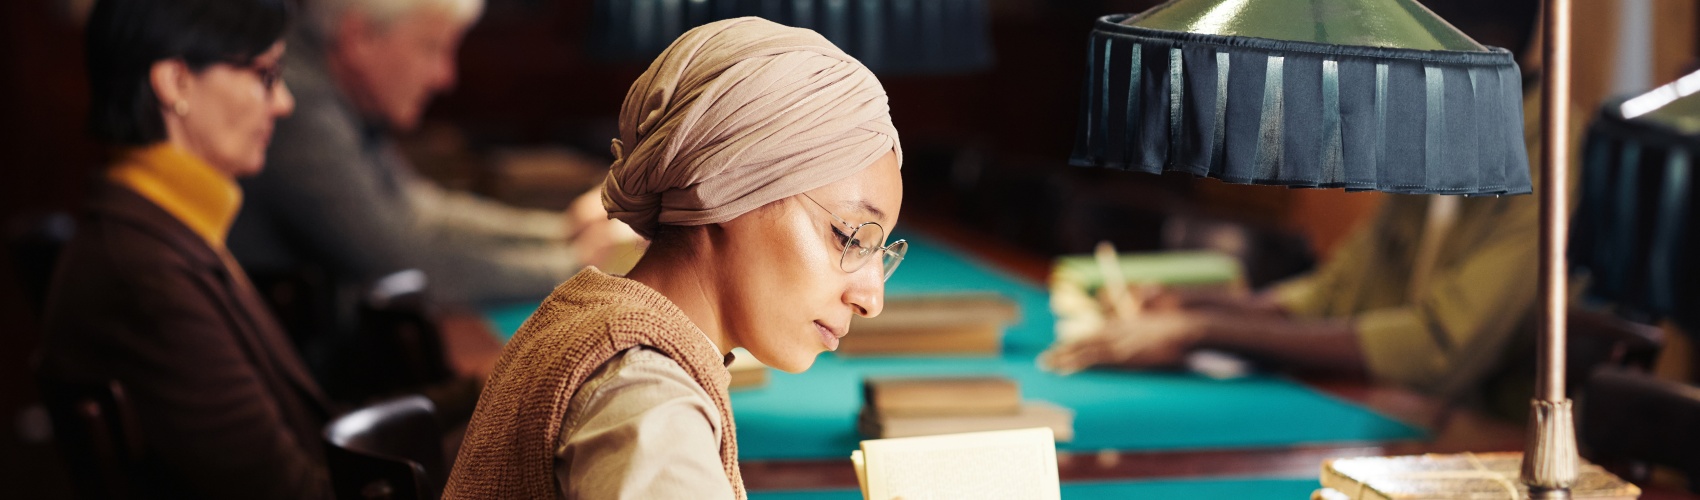 A young Muslim woman studies in a classic library